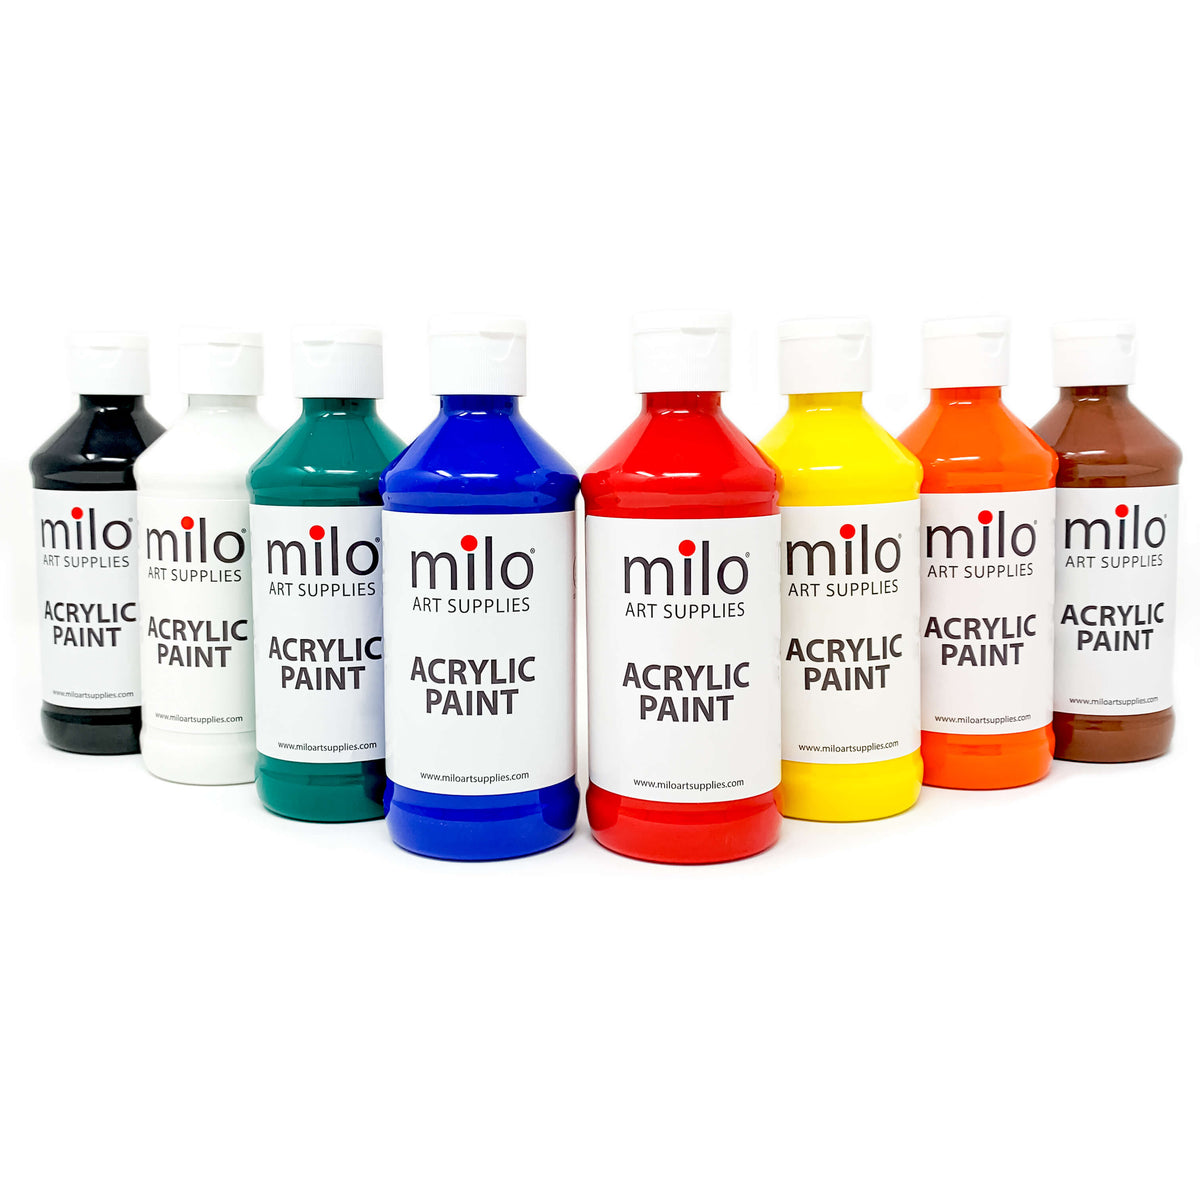 Acrylic Paint Sets for sale in Ann Arbor, Michigan